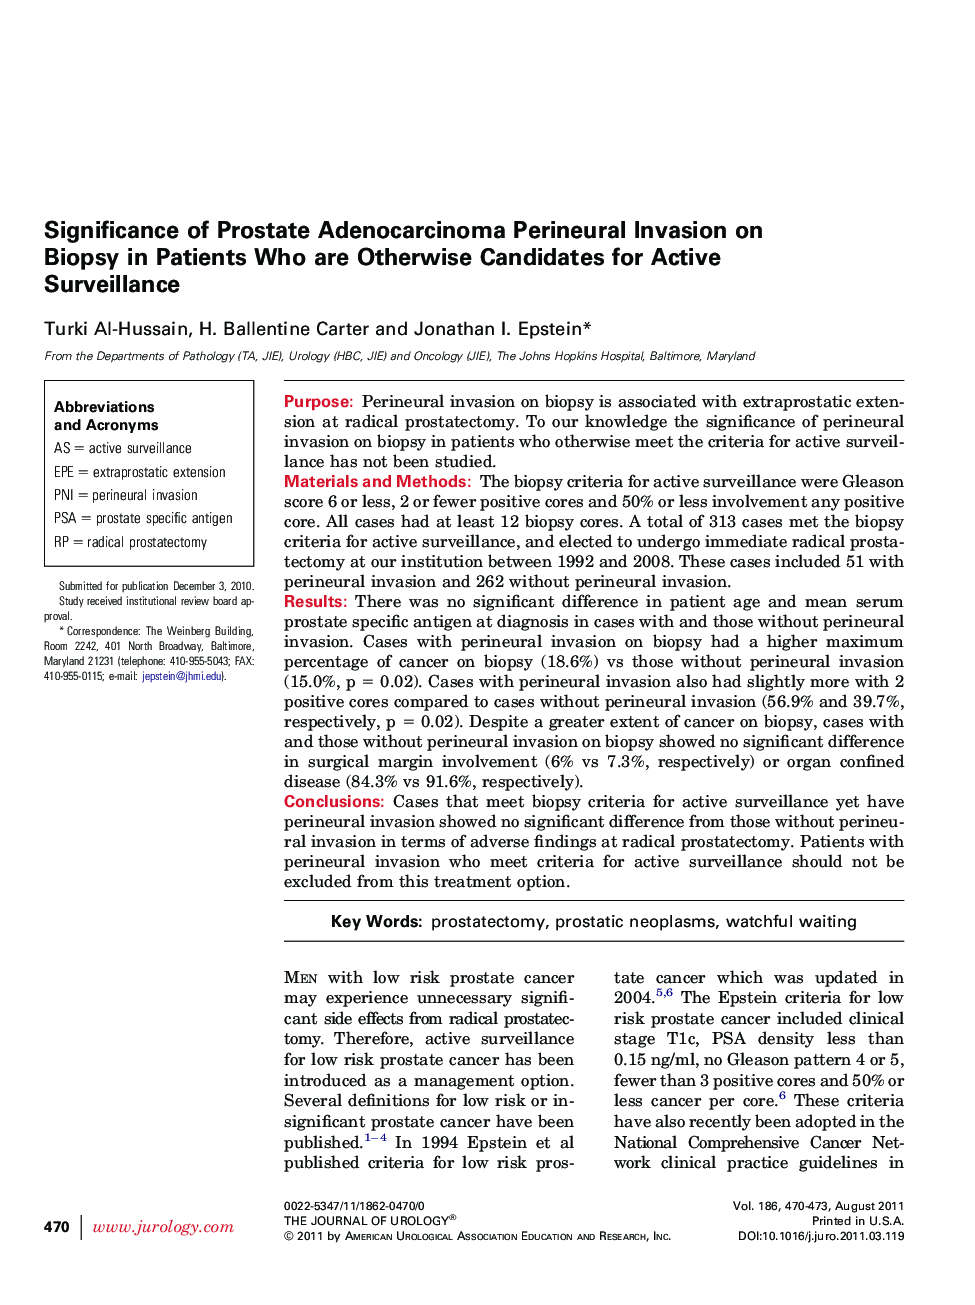 Significance of Prostate Adenocarcinoma Perineural Invasion on Biopsy in Patients Who are Otherwise Candidates for Active Surveillance 